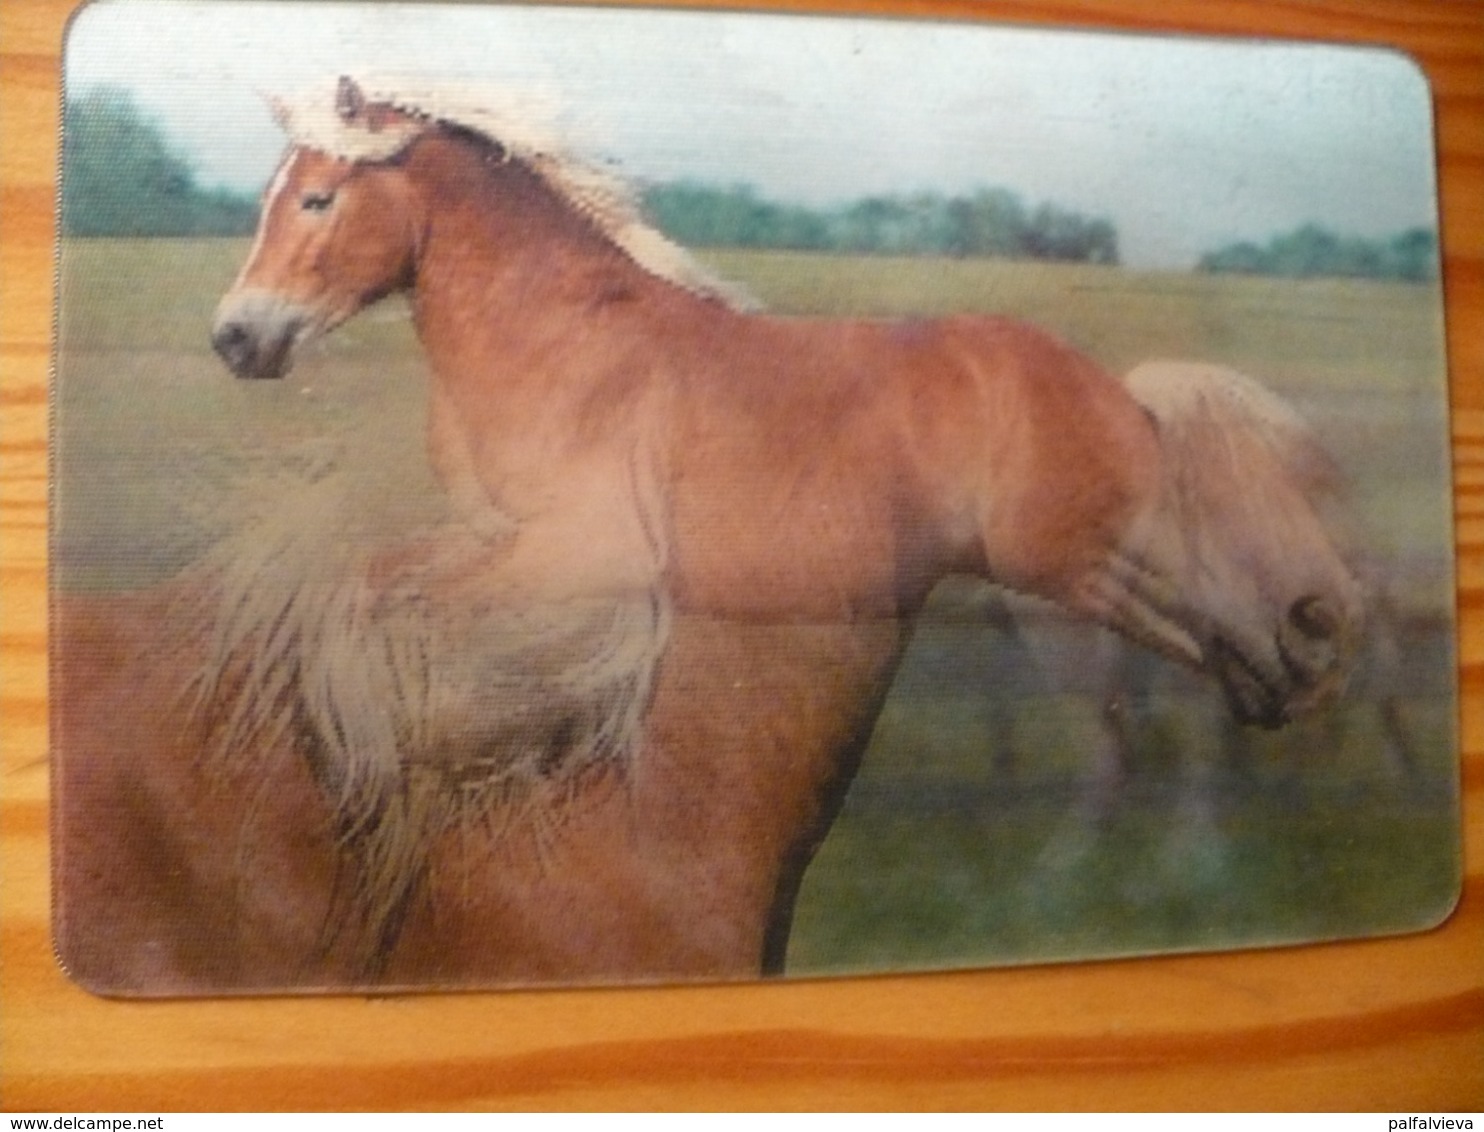 Horse - Lenticular (3D) Card  From Hungary - Other & Unclassified